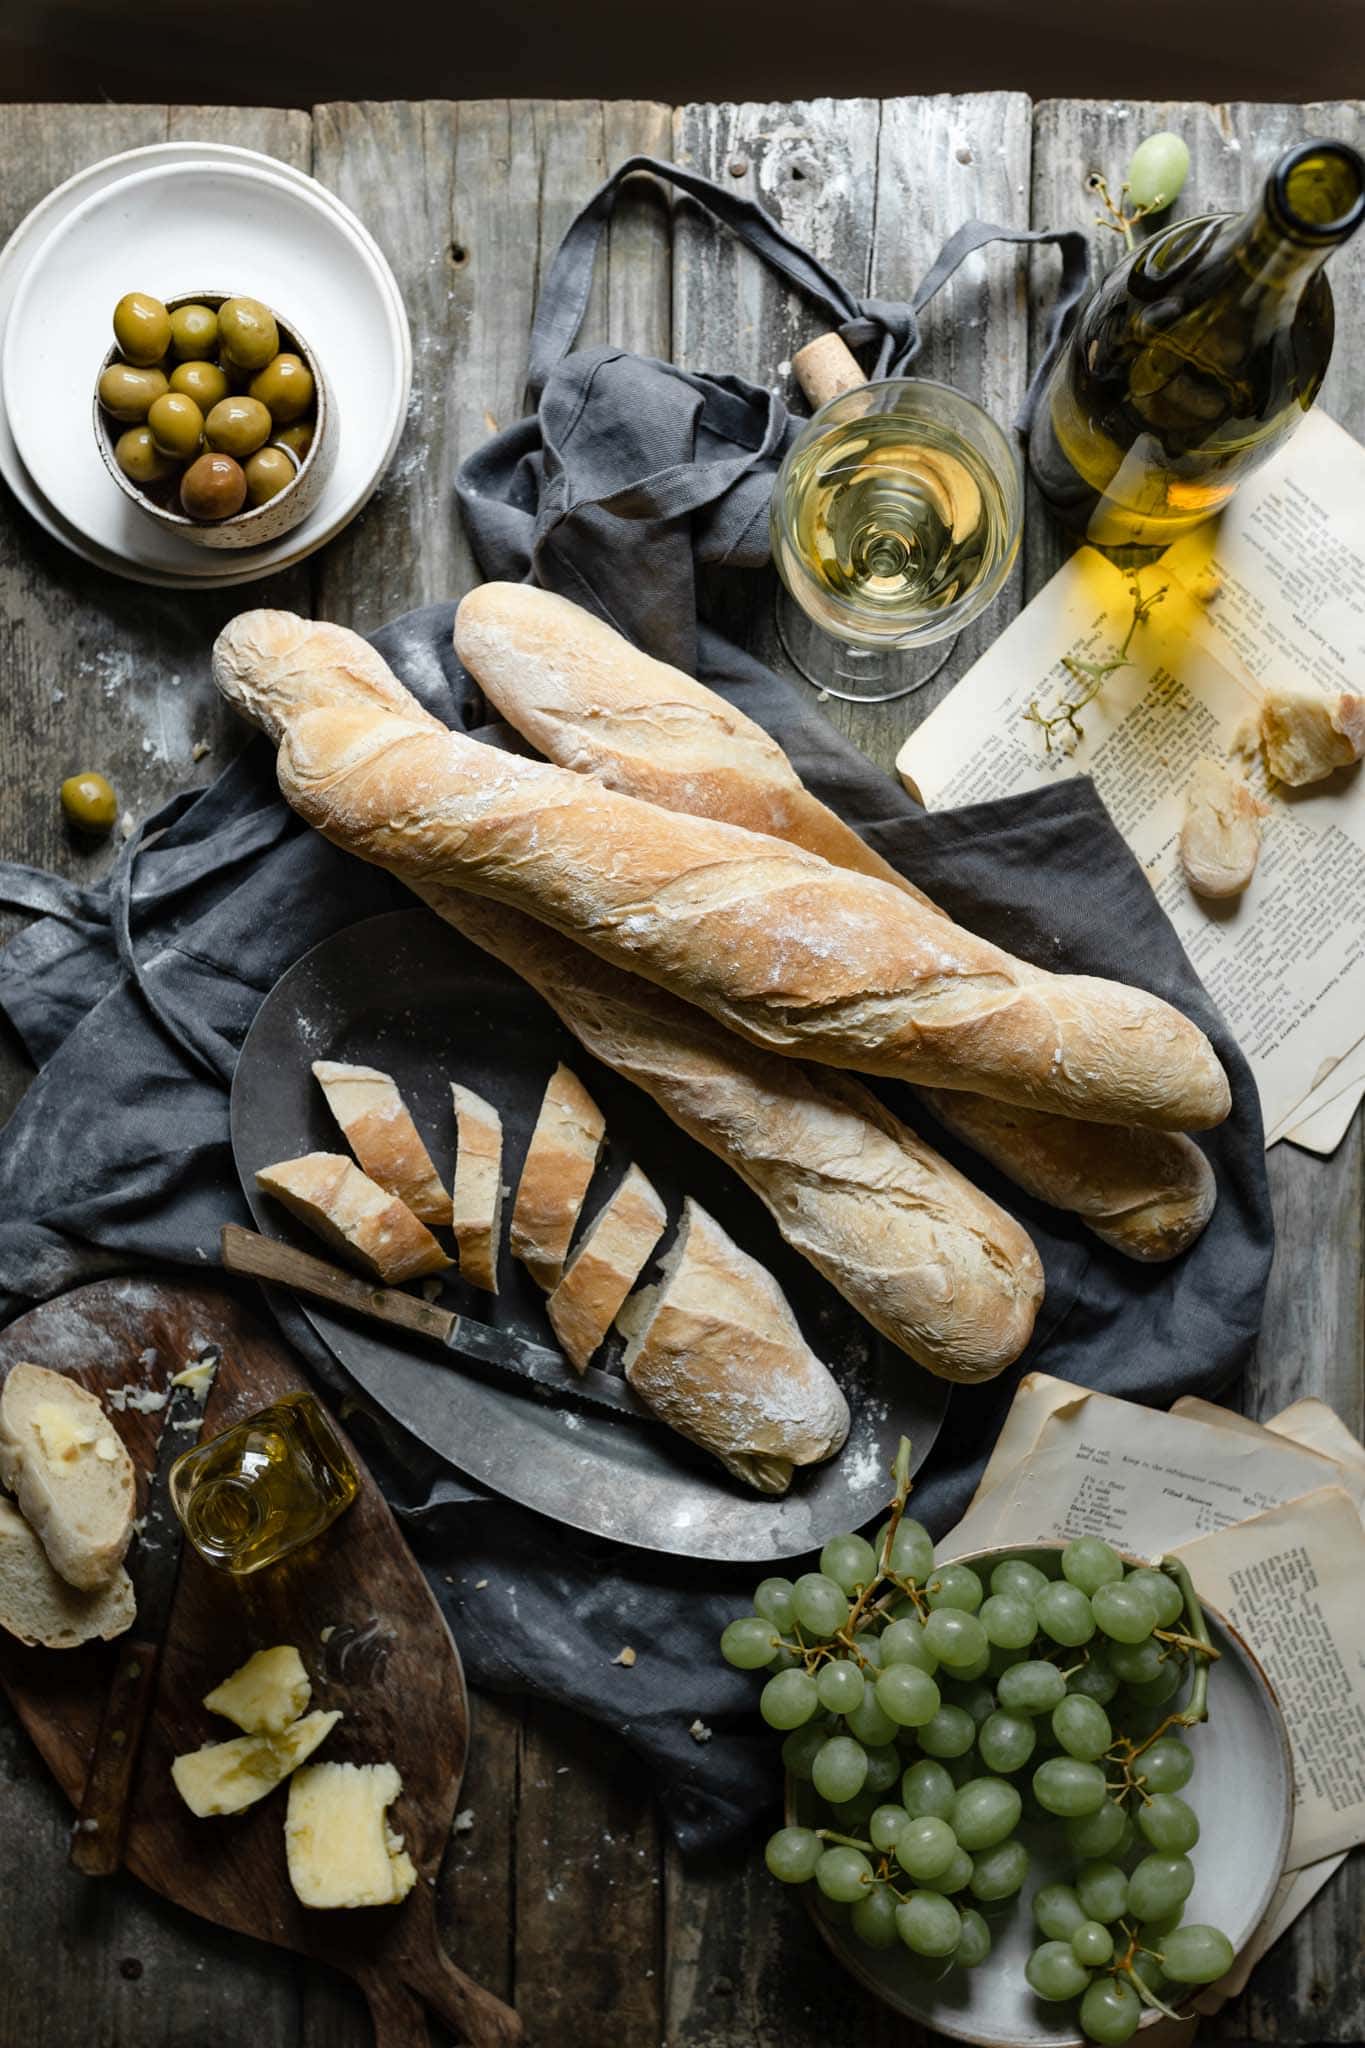 Homemade french baguettes with olives and olive oil.